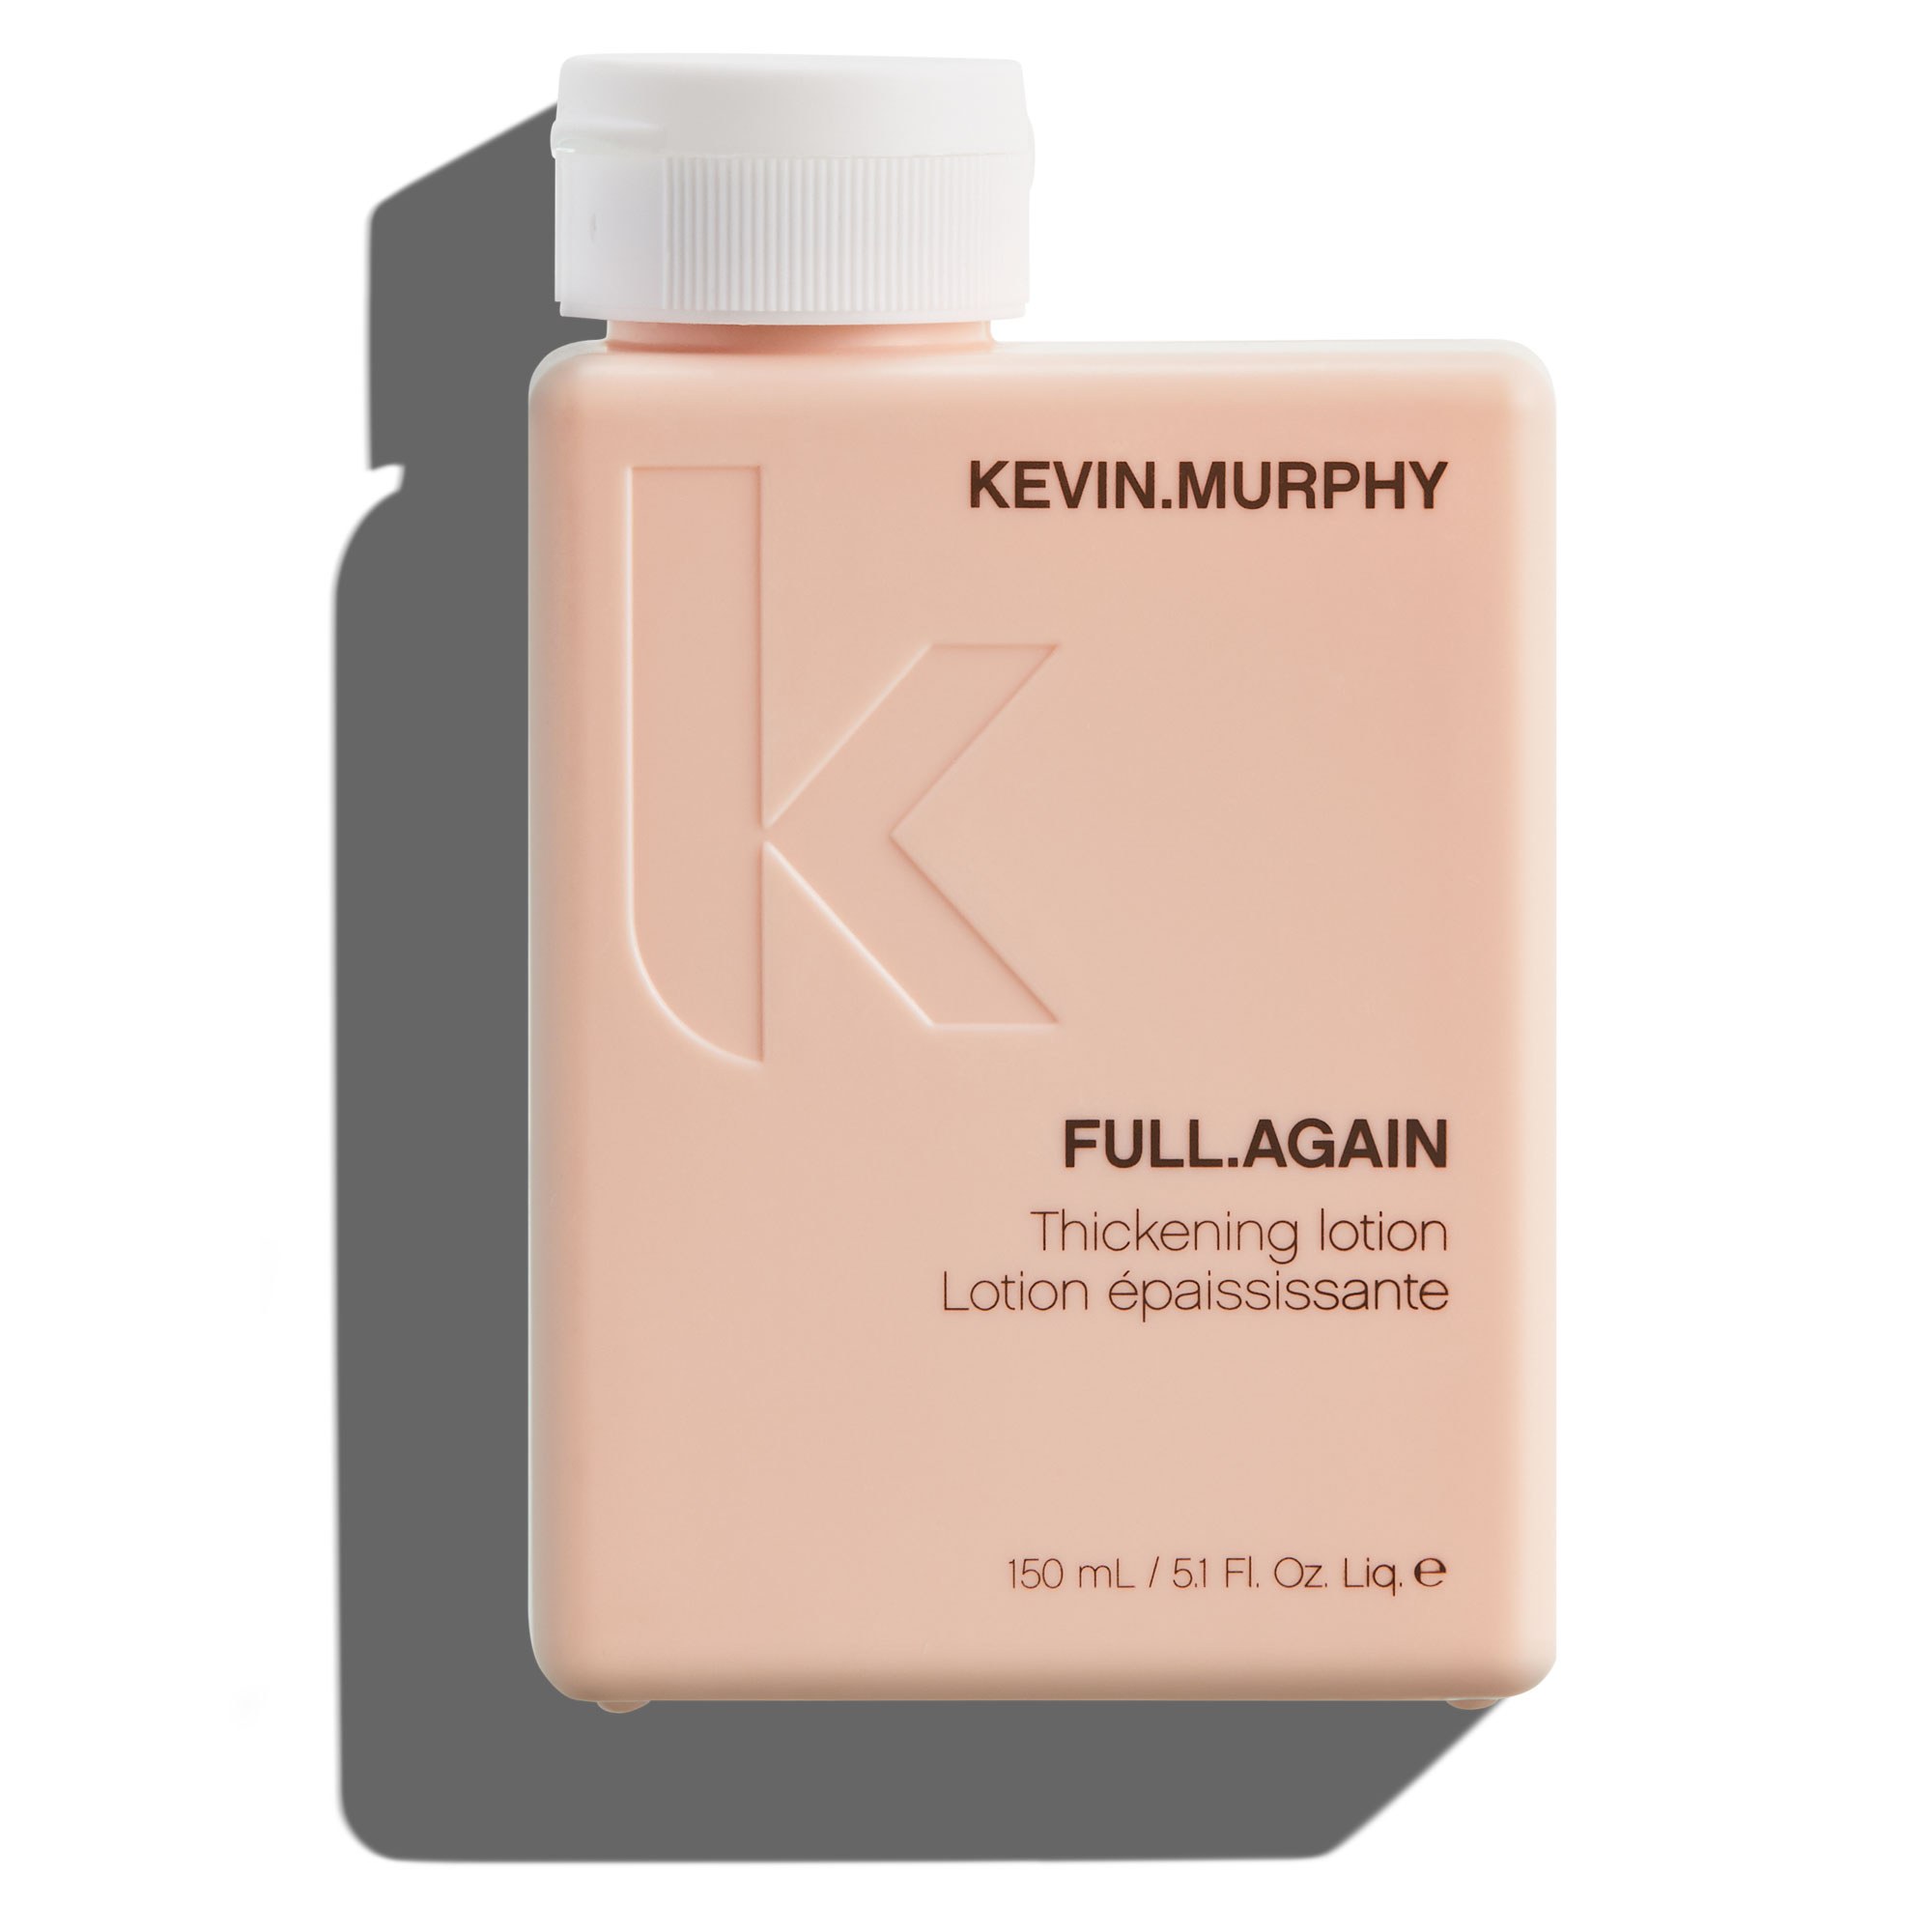 KEVIN.MURPHY FULL.AGAIN Thickening Lotion 5.1oz